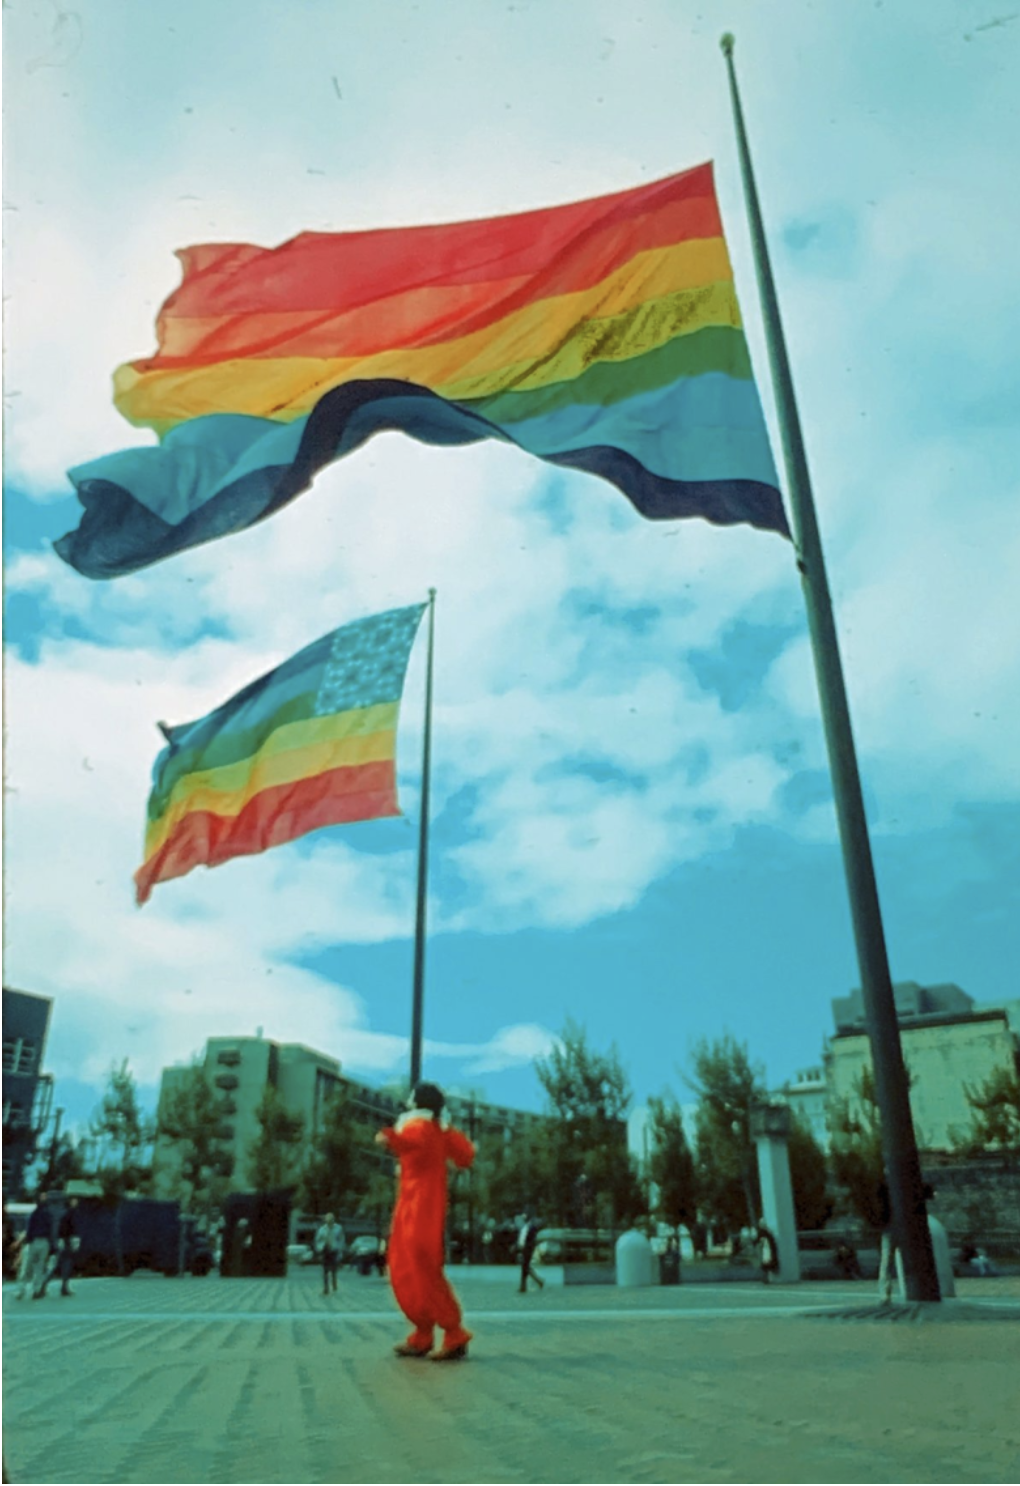 The two original eight-color rainbow flags designed by Gilbert Baker flying at United Nations Plaza during San Francisco Gay Freedom Day 1978. Photograph by Mark Rennie, courtesy the Gilbert Baker Foundation.